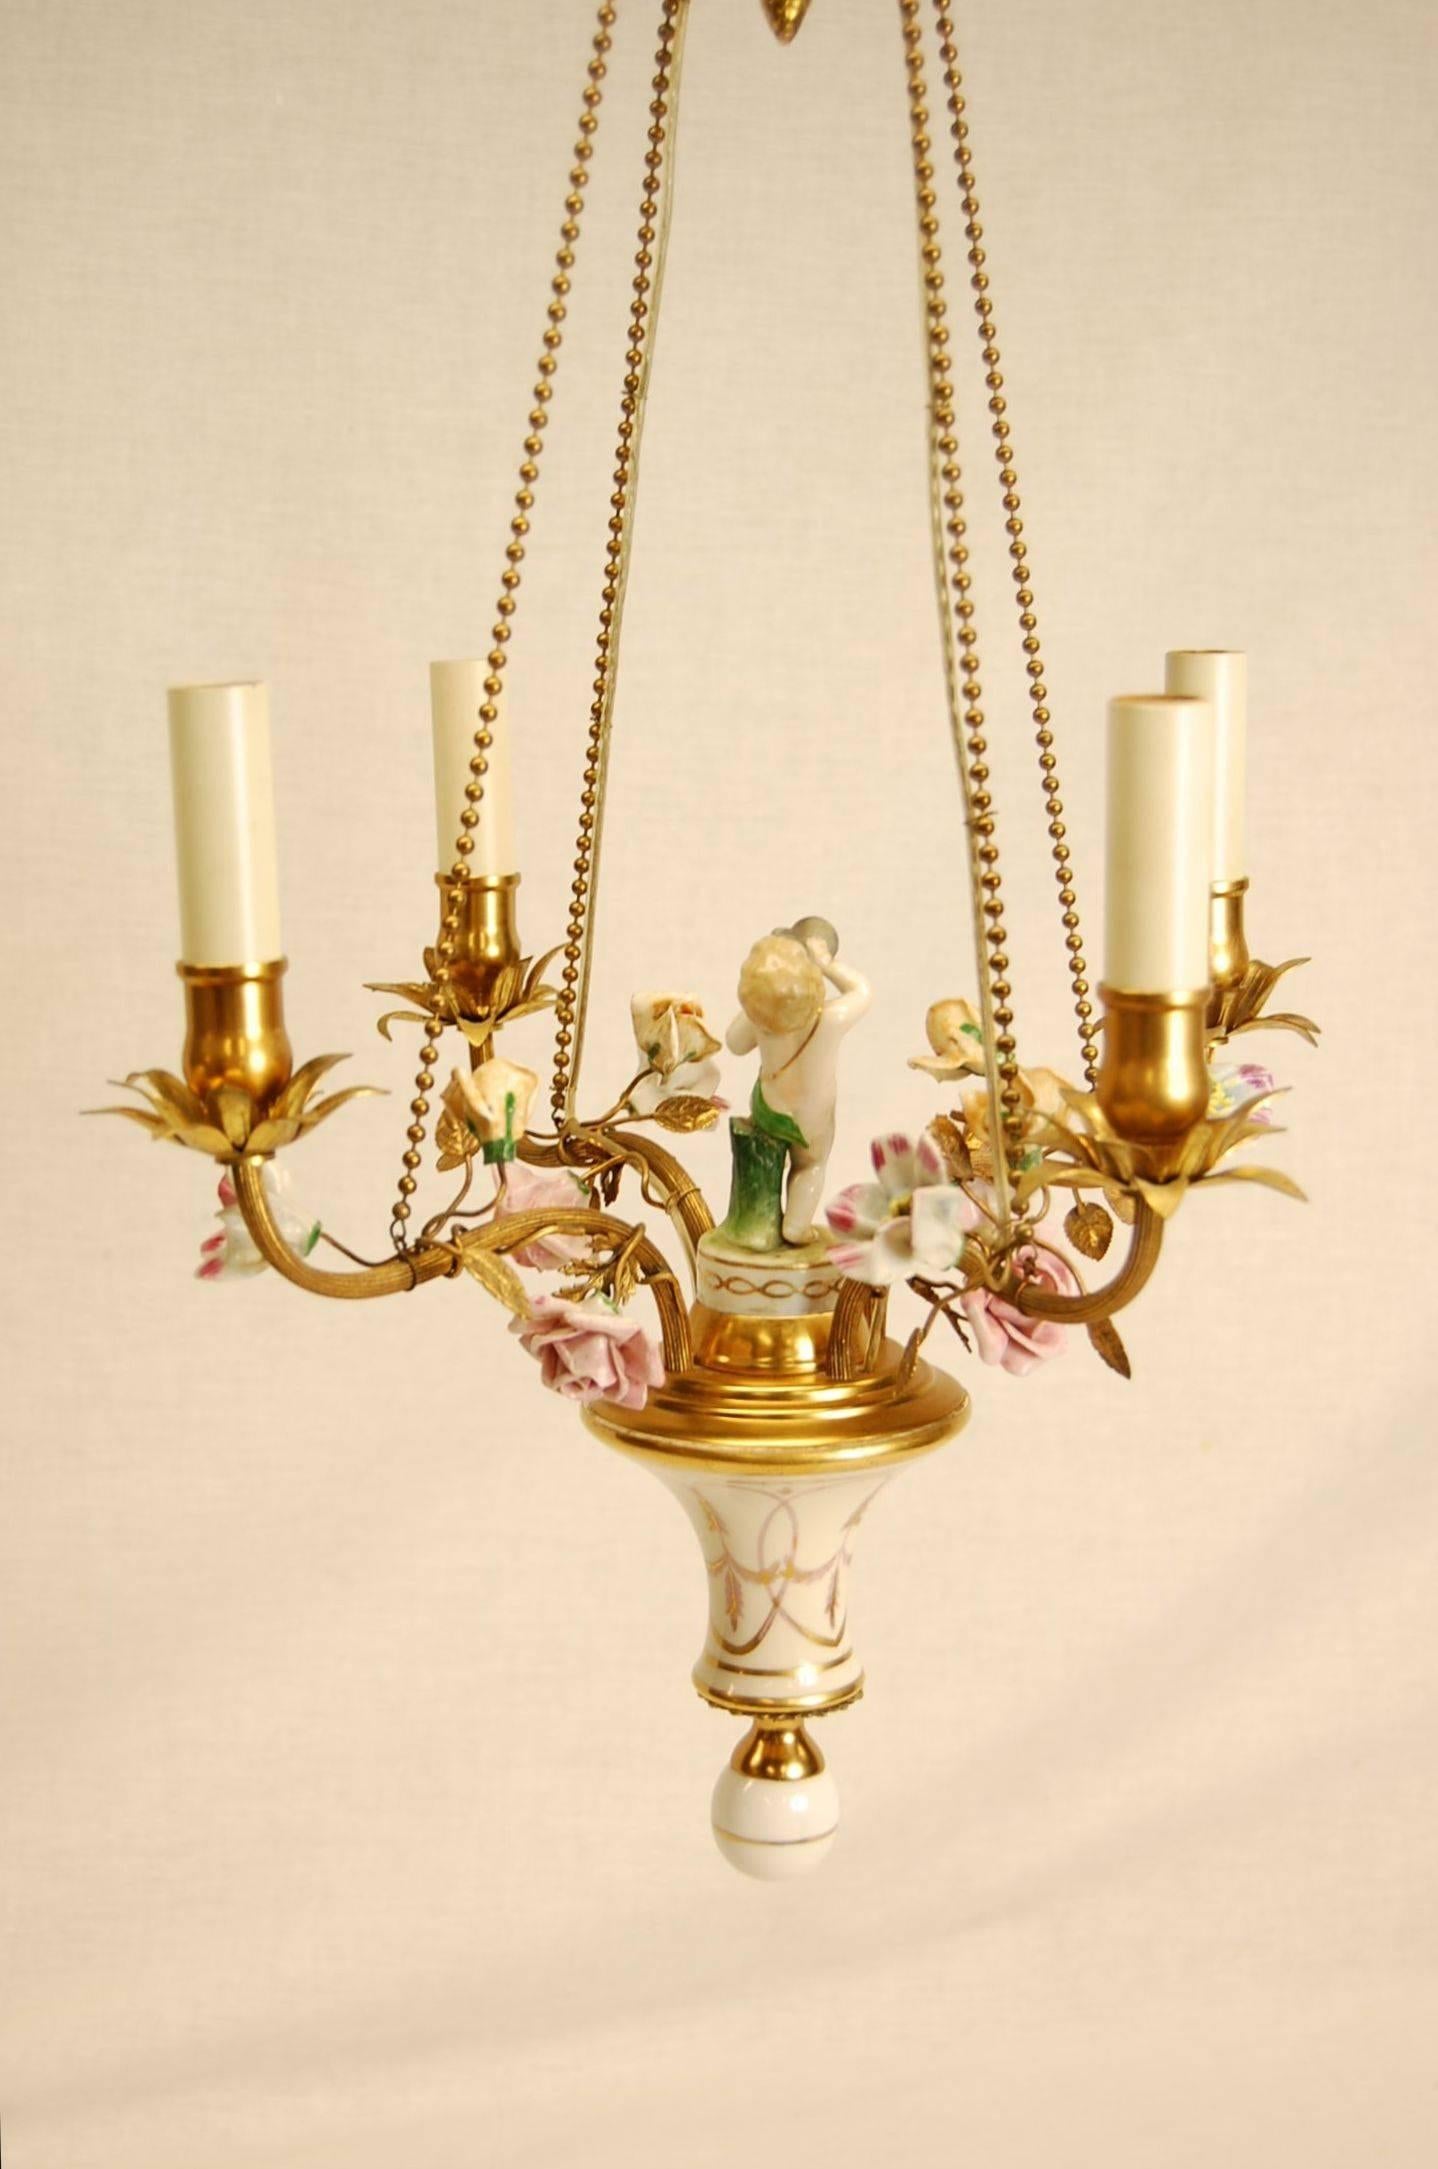 Late Victorian French Gilt Metal Chandelier with Hand-Painted Flowers, Early 20th Century